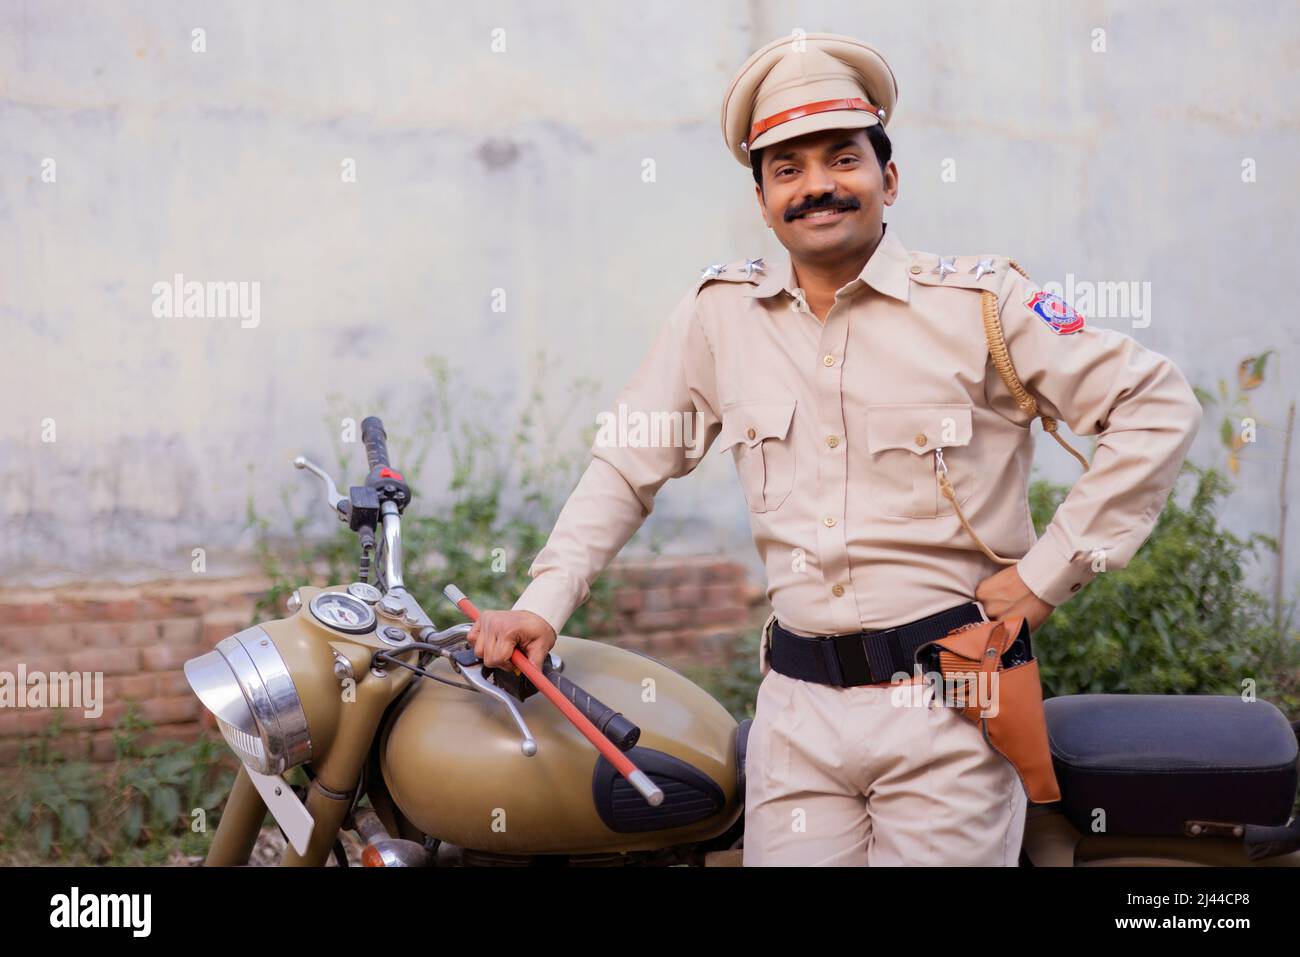 Portrait of an Indian policeman posing with bike Stock Photo